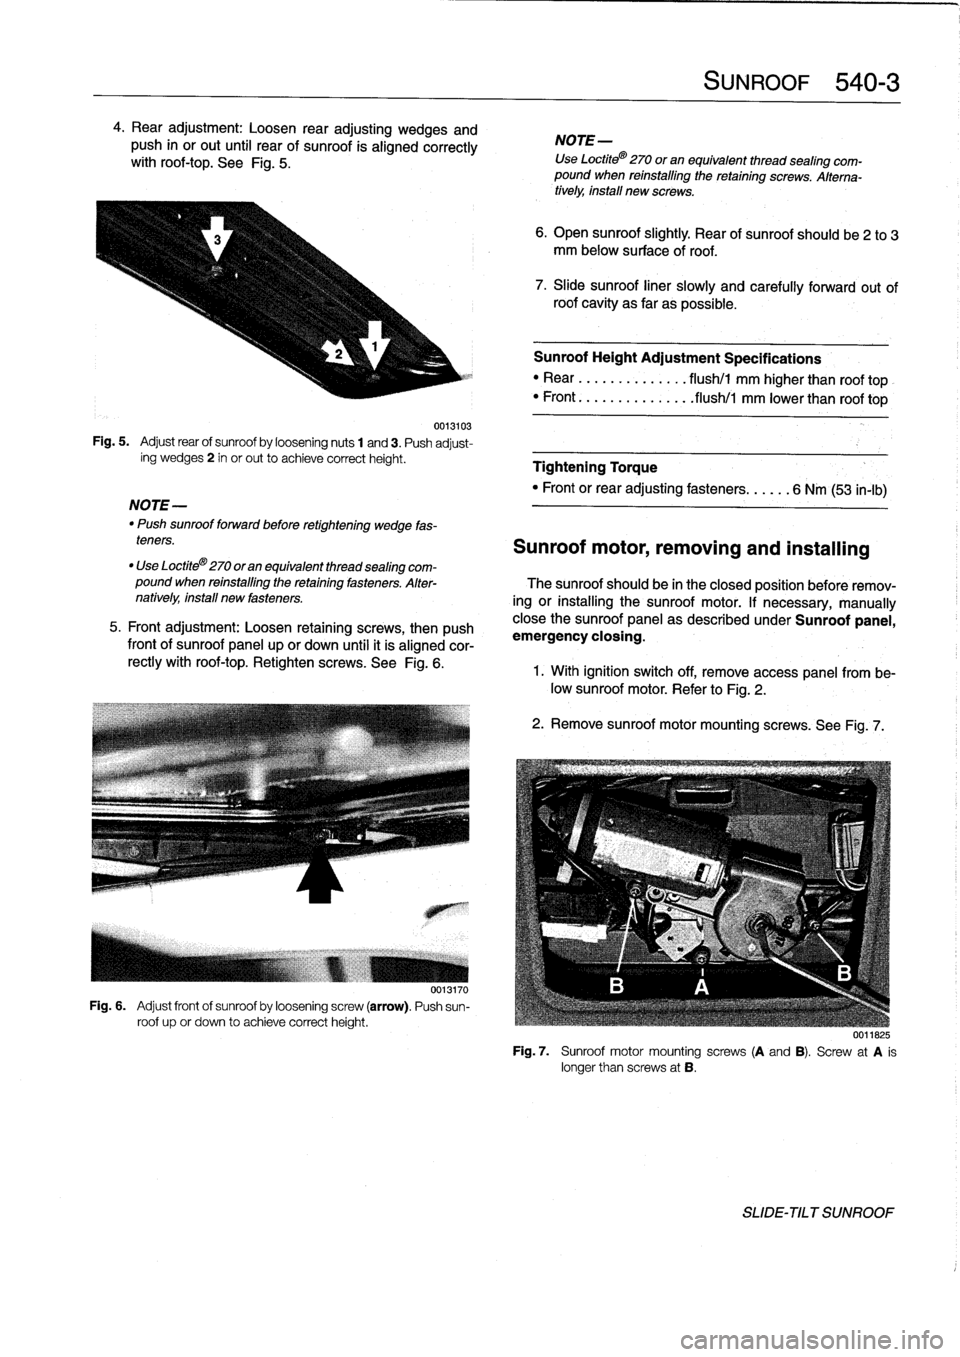 BMW 323i 1995 E36 Workshop Manual 4
.
Rear
adjustment
:
Loosen
rear
adjusting
wedges
and
push
in
or
out
until
rear
of
sunroof
is
aligned
correctly
withroof-top
.
See
Fig
.
5
.

0013103
Fig
.
5
.

	

Adjust
rear
of
sunroof
by
loosening